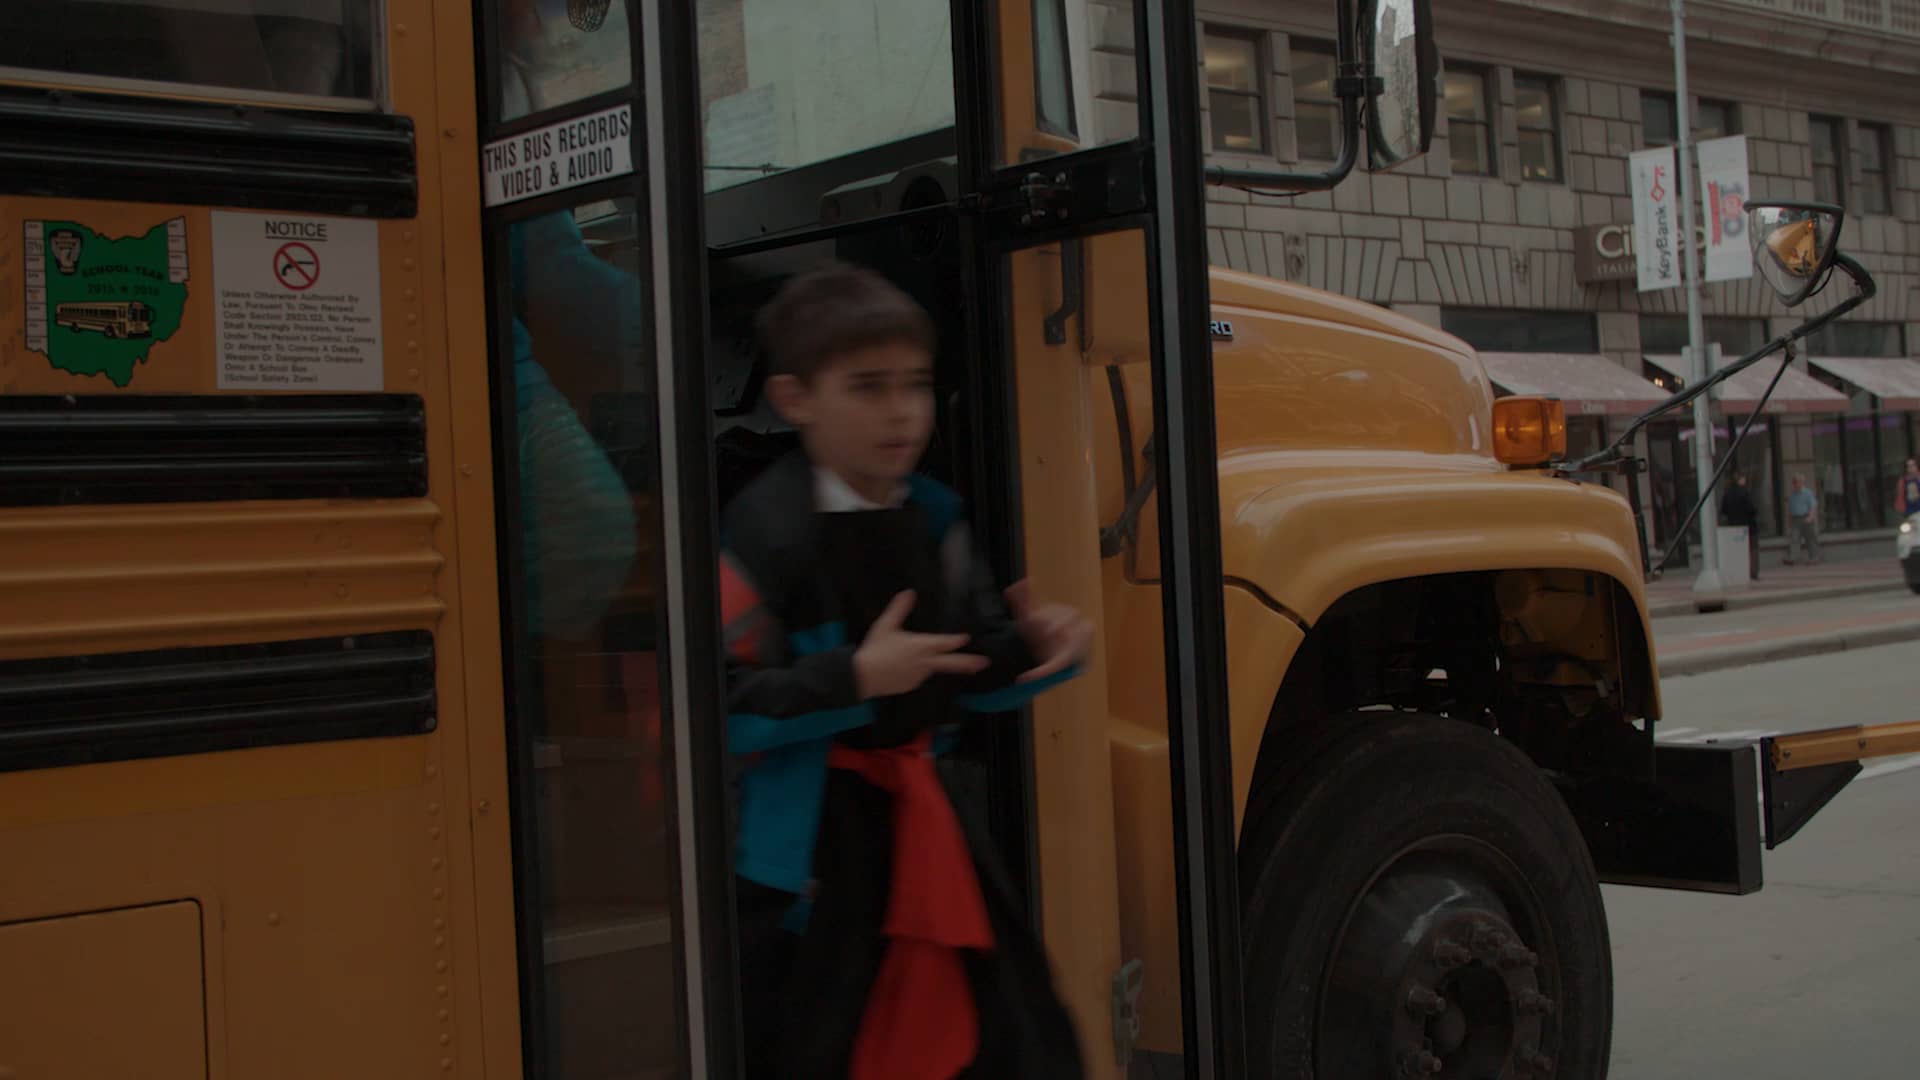 Visiting Playhouse Square - Social Story for Schools and Groups on Vimeo